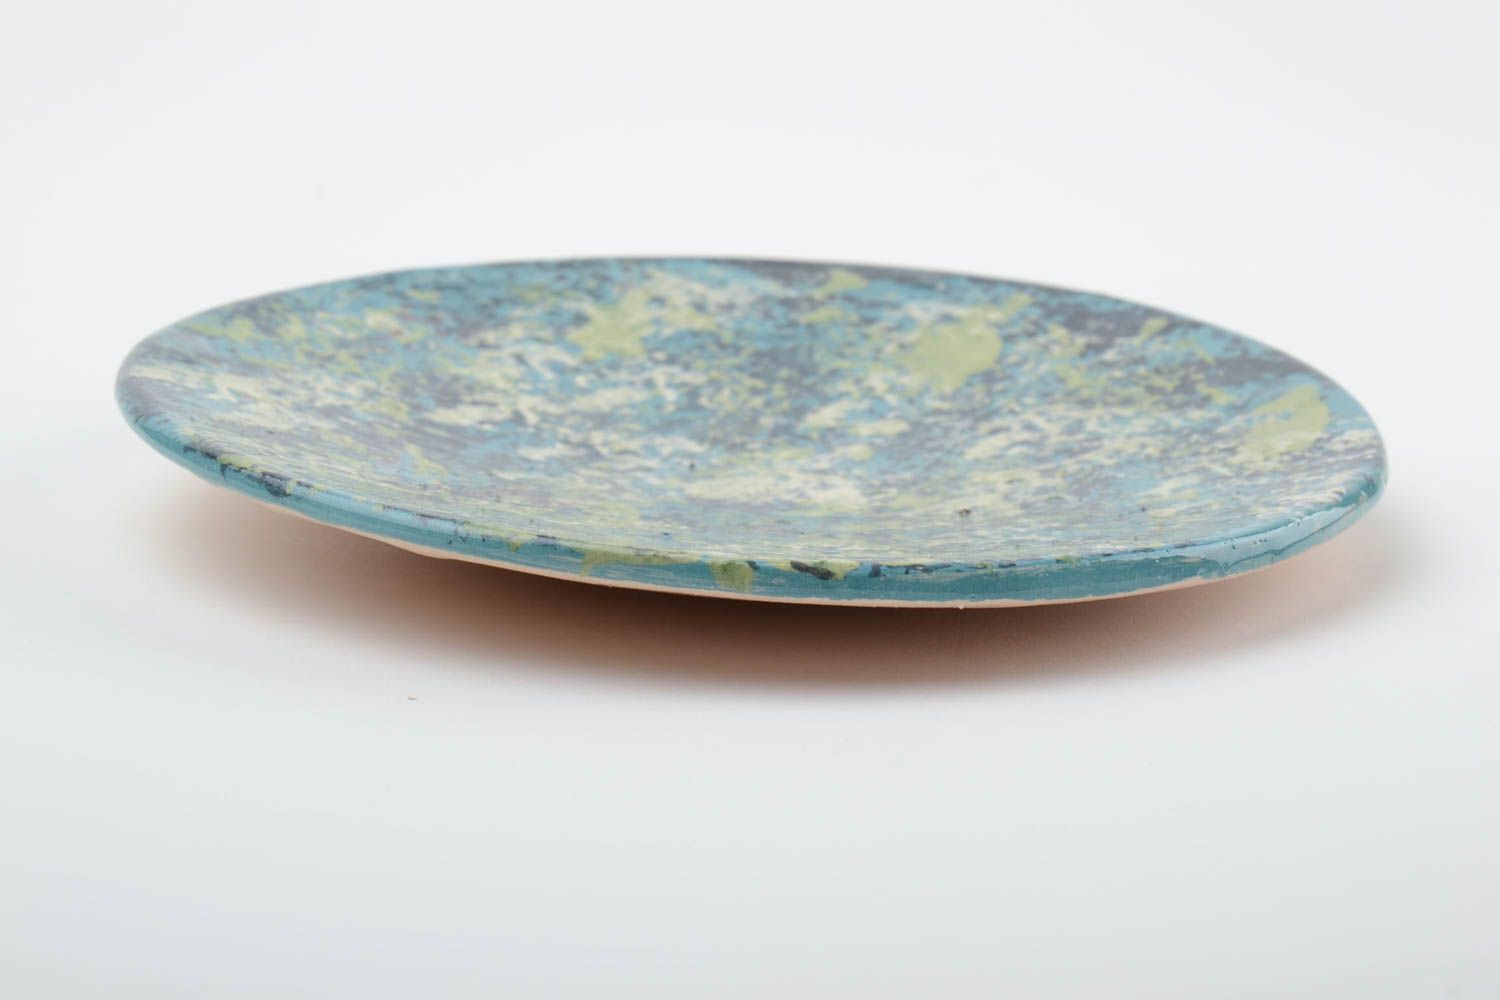 Handmade decorative glazed ceramic saucer in blue and gray color palettes photo 4